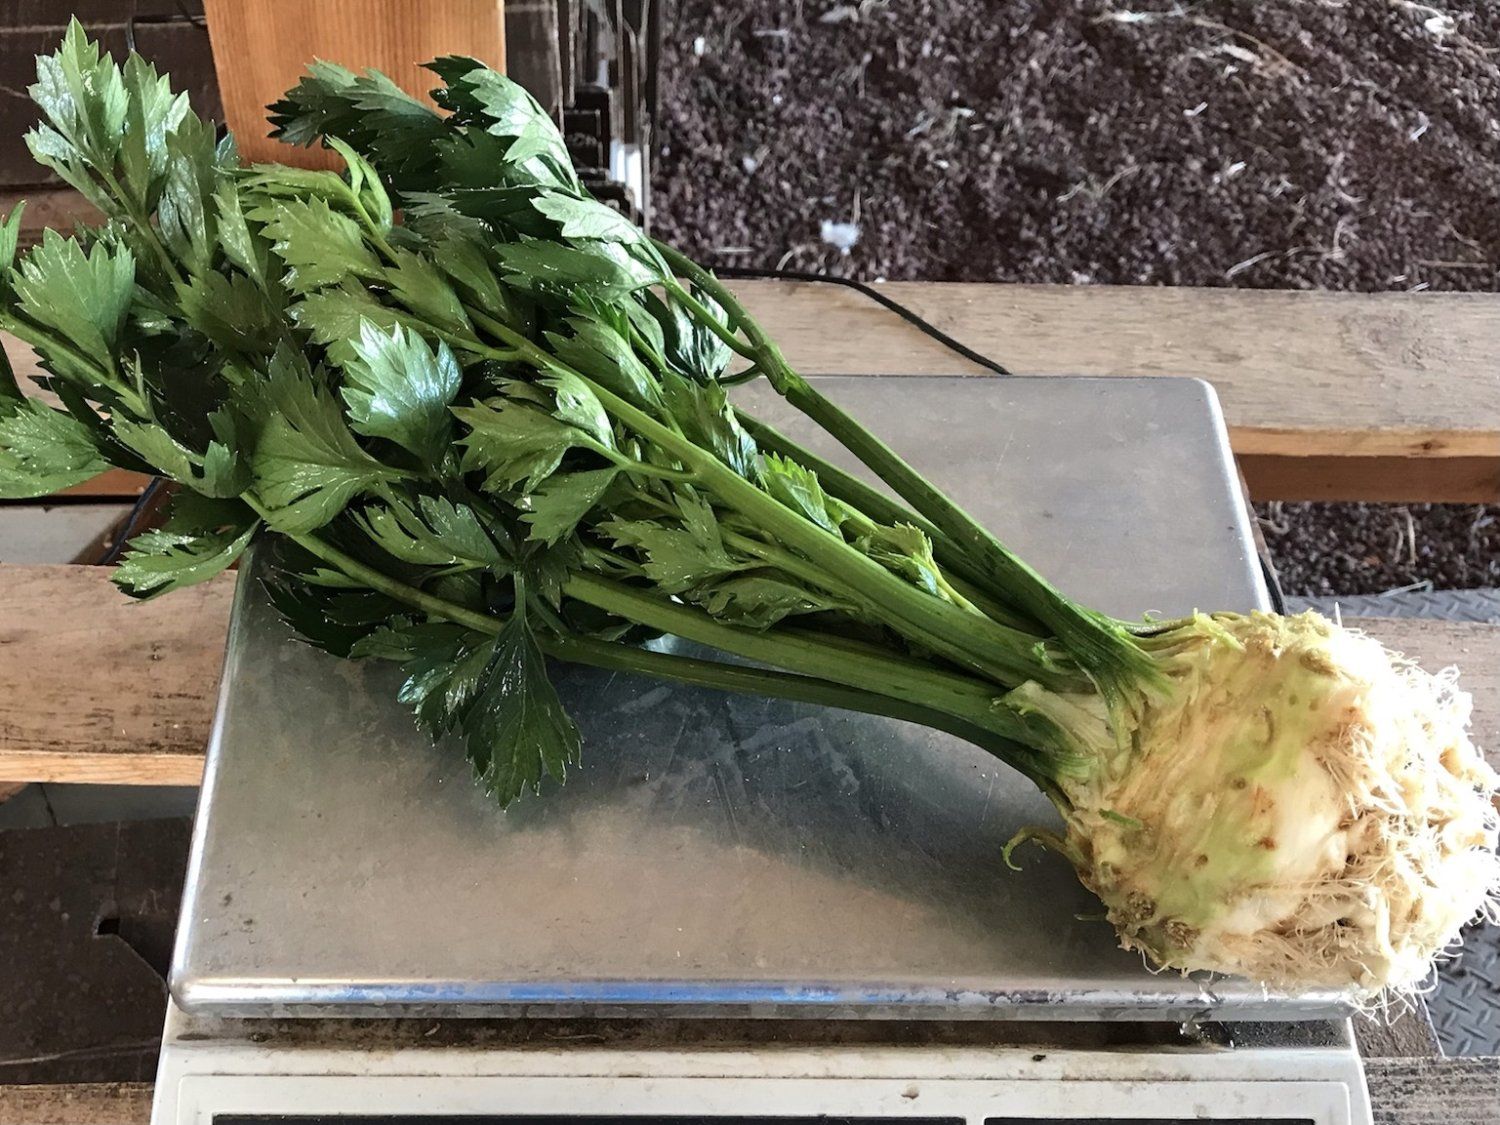 Next Happening: Celeriac, Rosemary, and Baby Bok Choy this Week